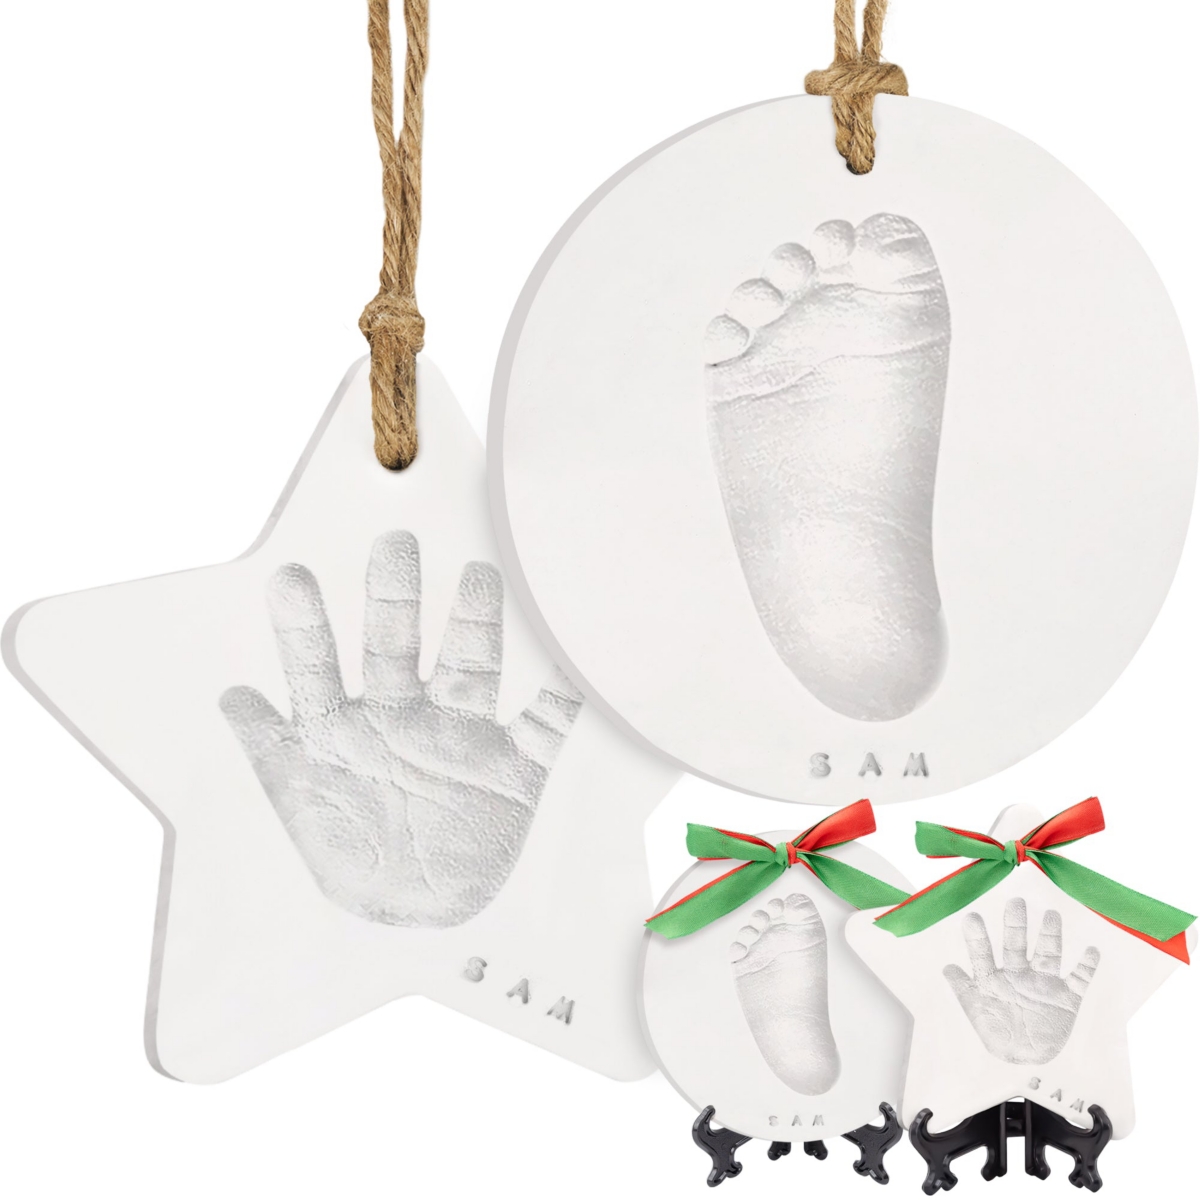 Keababies 2pk Baby Hand And Footprint Ornament Kit, Personalized All-in-1 Baby Foot Print Kit For Newborn, Bab In White